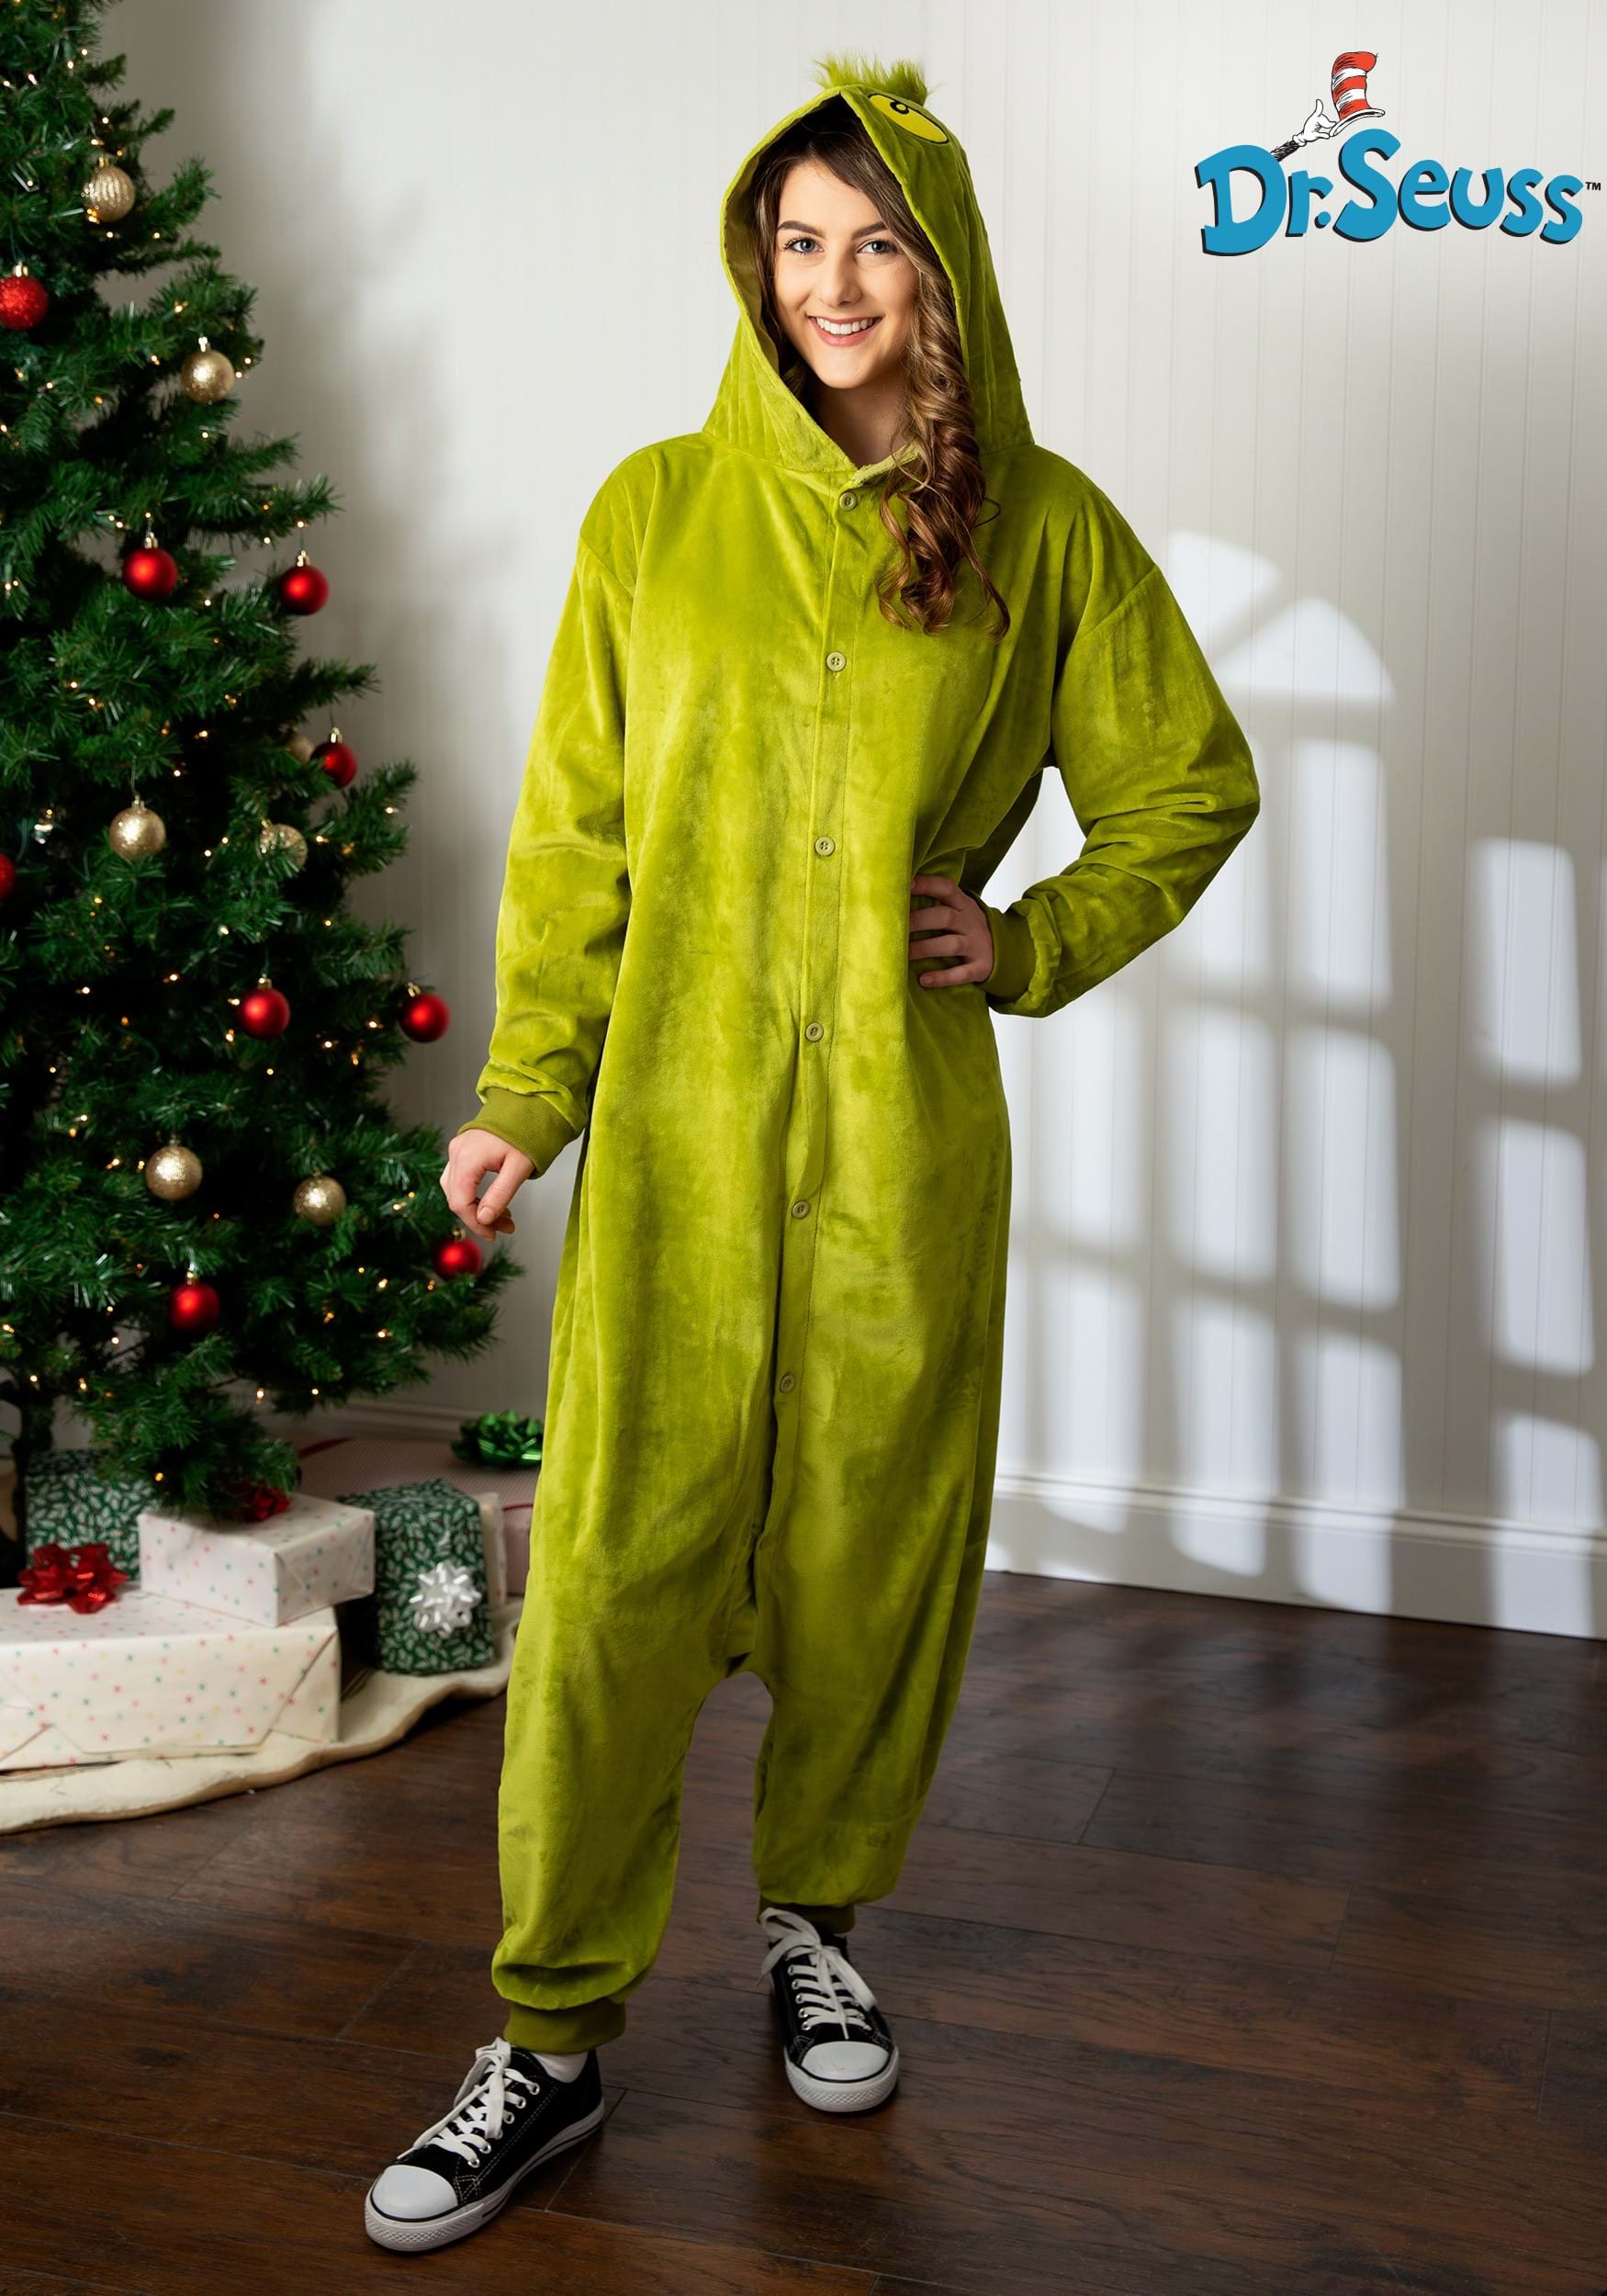 https://images.halloweencostumes.com/products/46877/1-1/the-grinch-adult-onesie-costume-upd.jpg